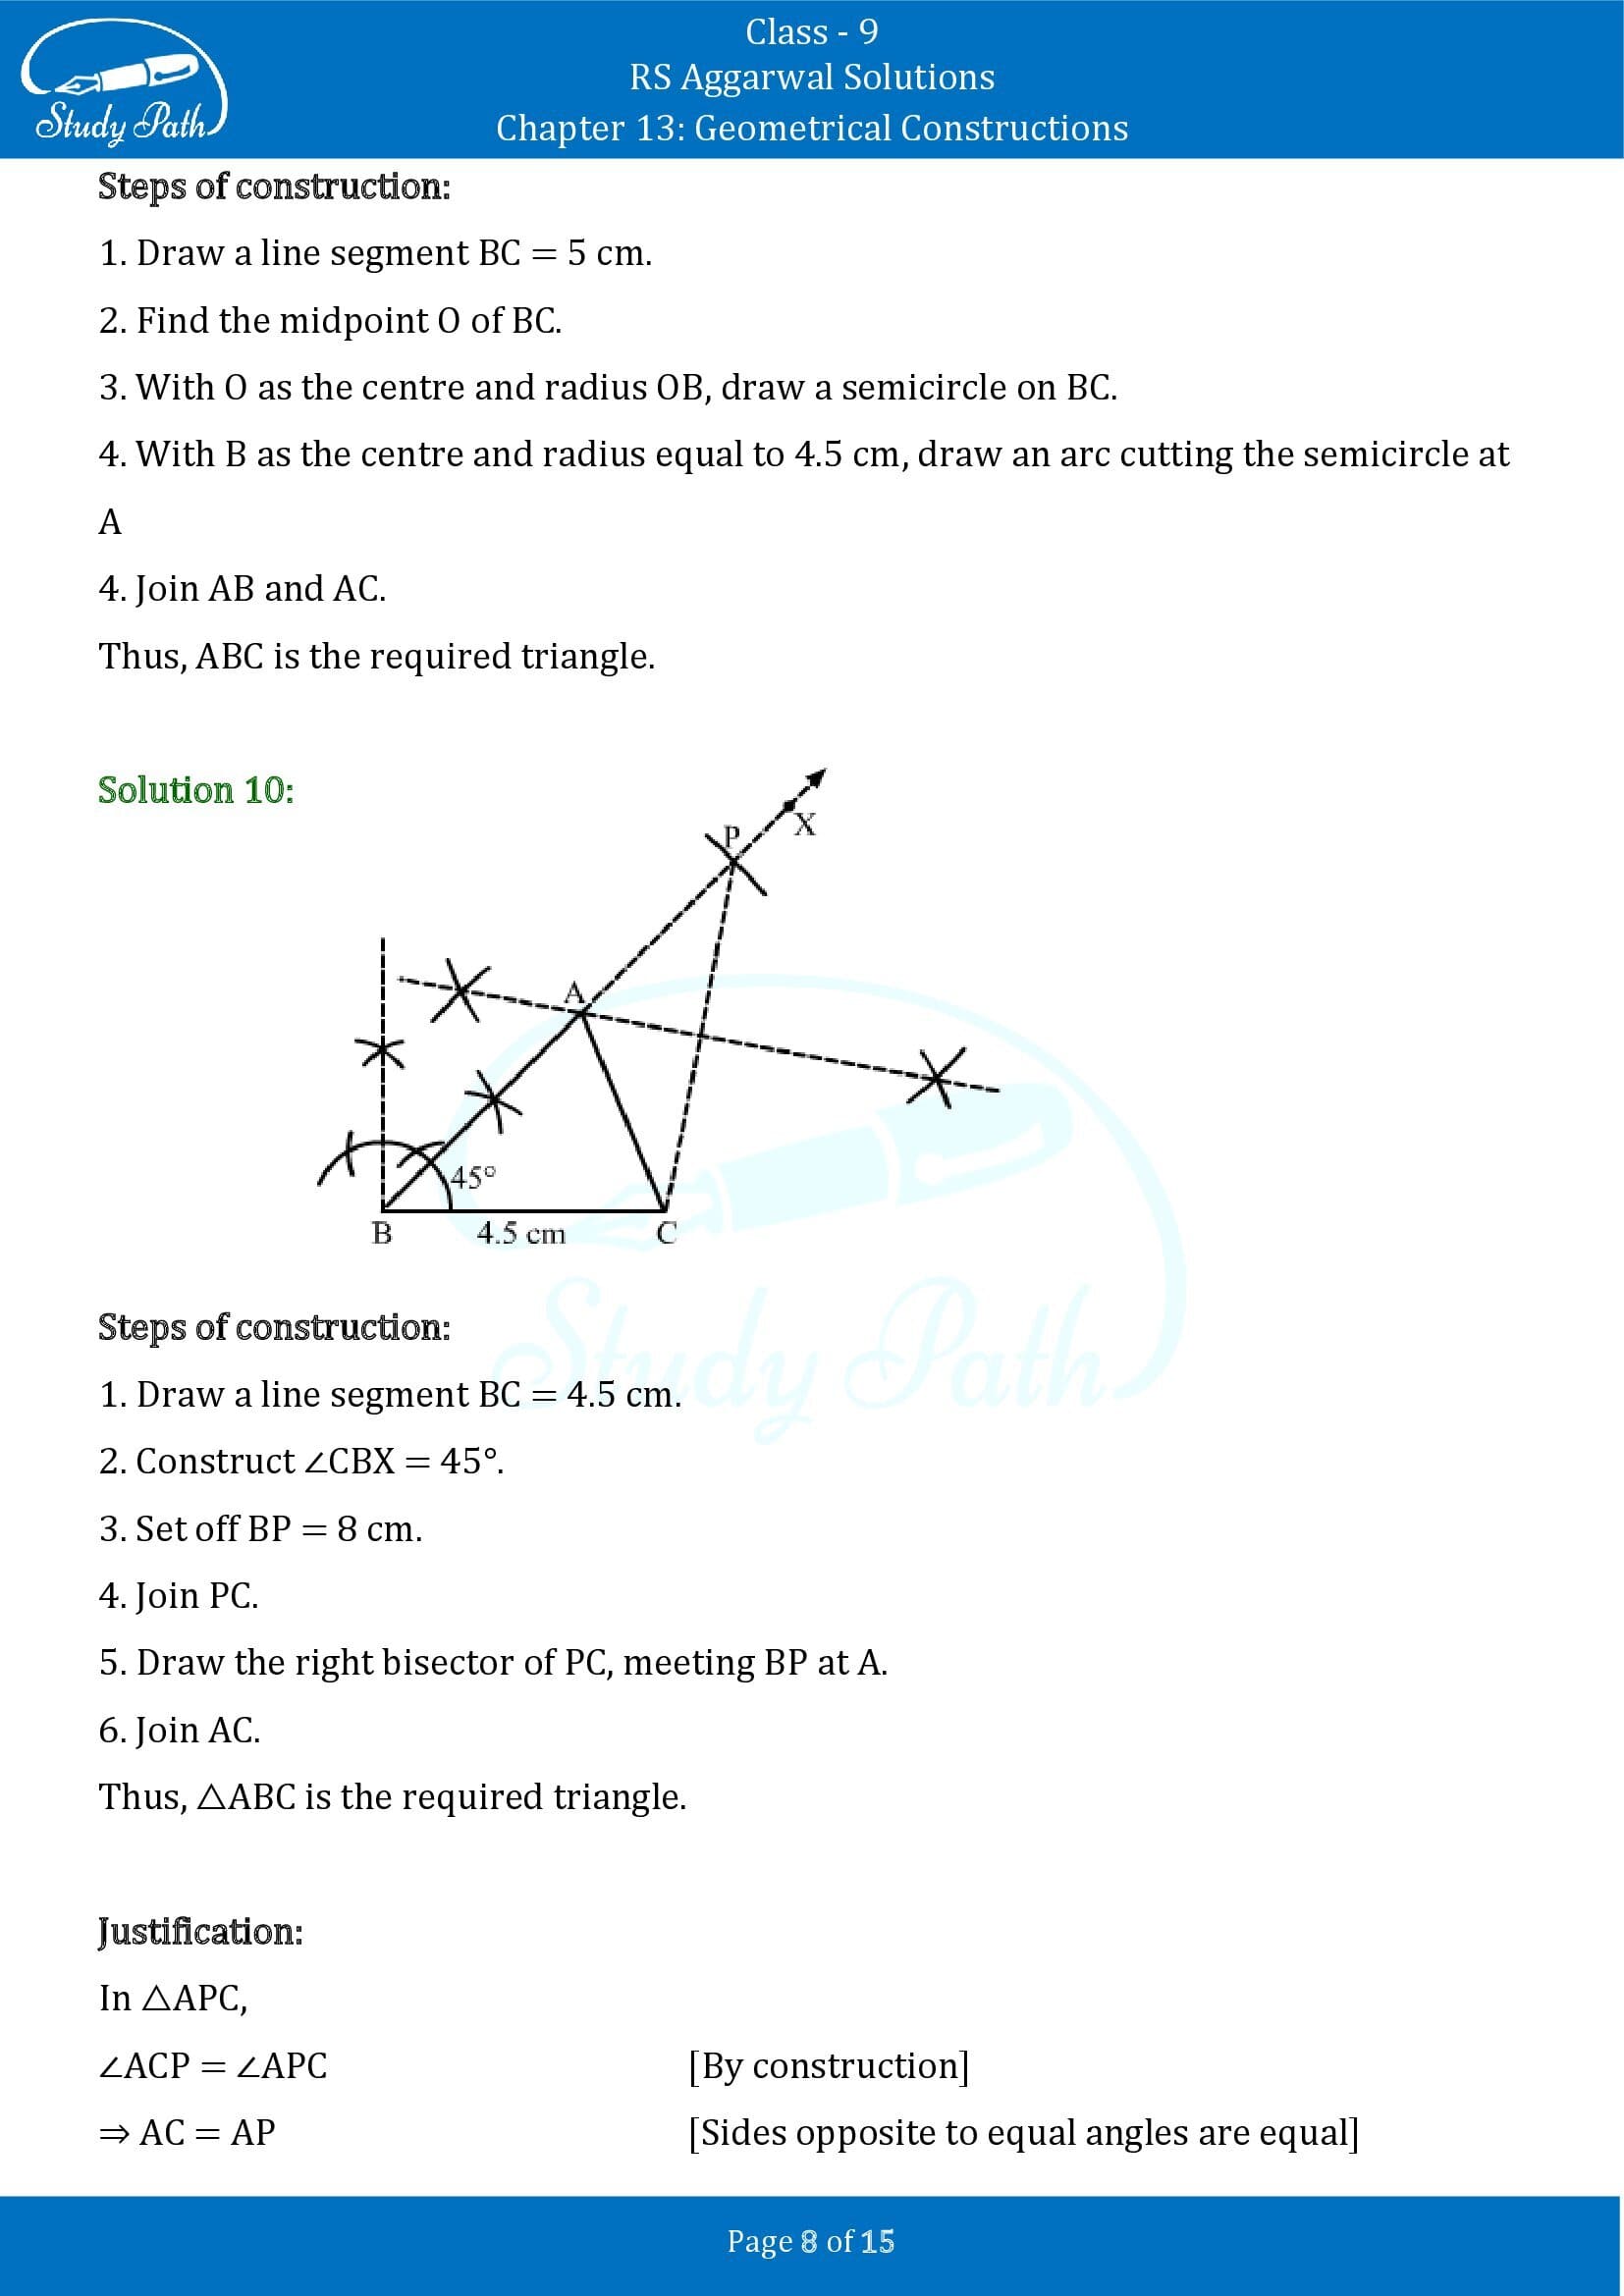 RS Aggarwal Solutions Class 9 Chapter 13 Geometrical Constructions 08